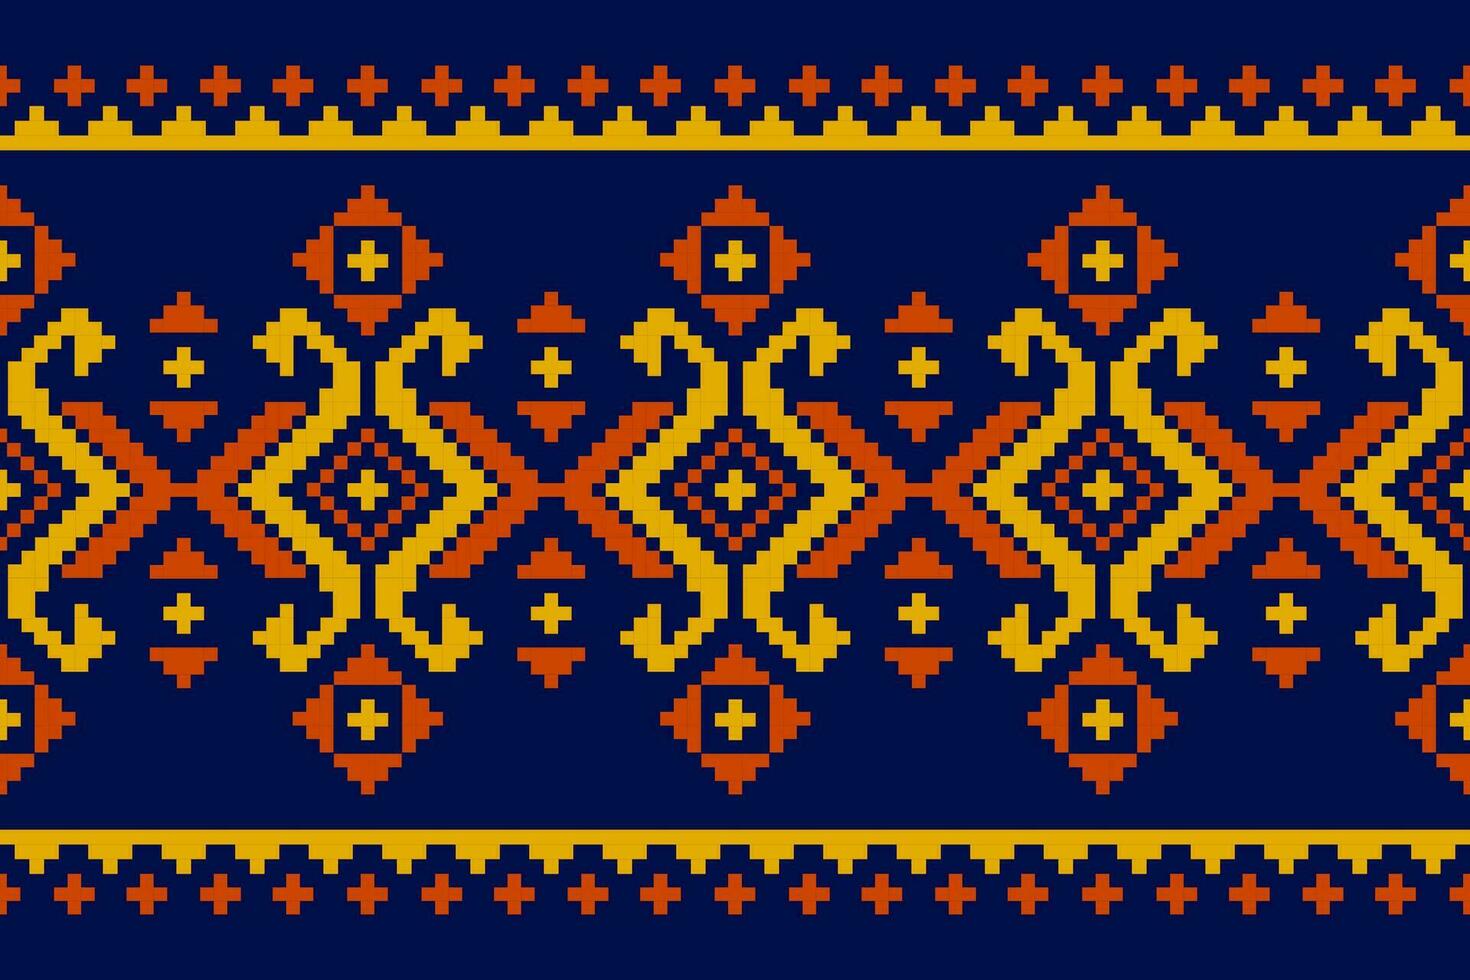 Carpet tribal pattern art. Geometric ethnic seamless pattern traditional. American, Mexican style. vector